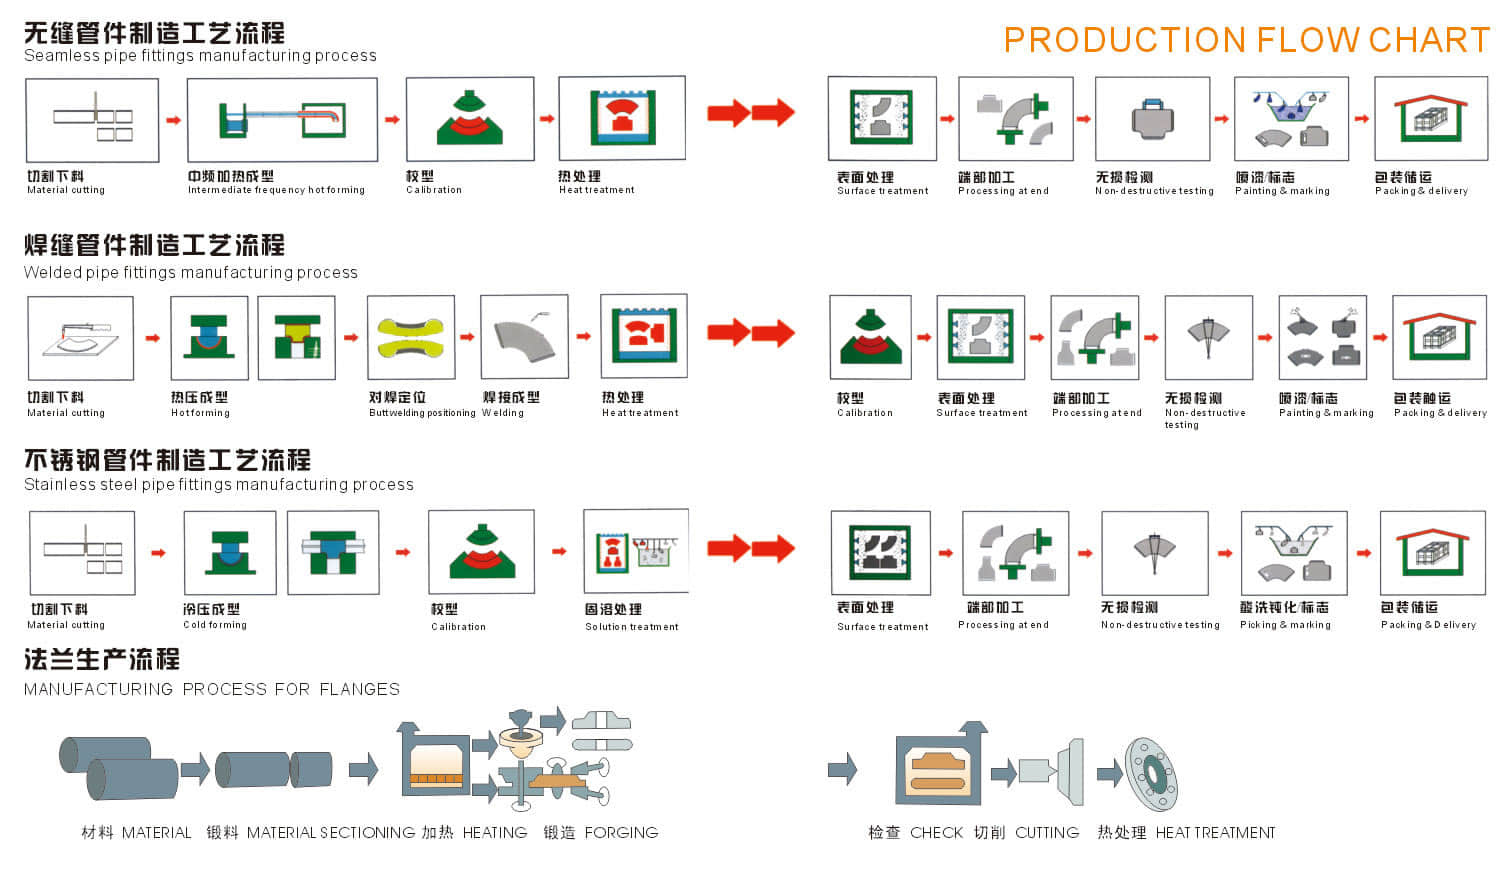 Fittings production flow chart